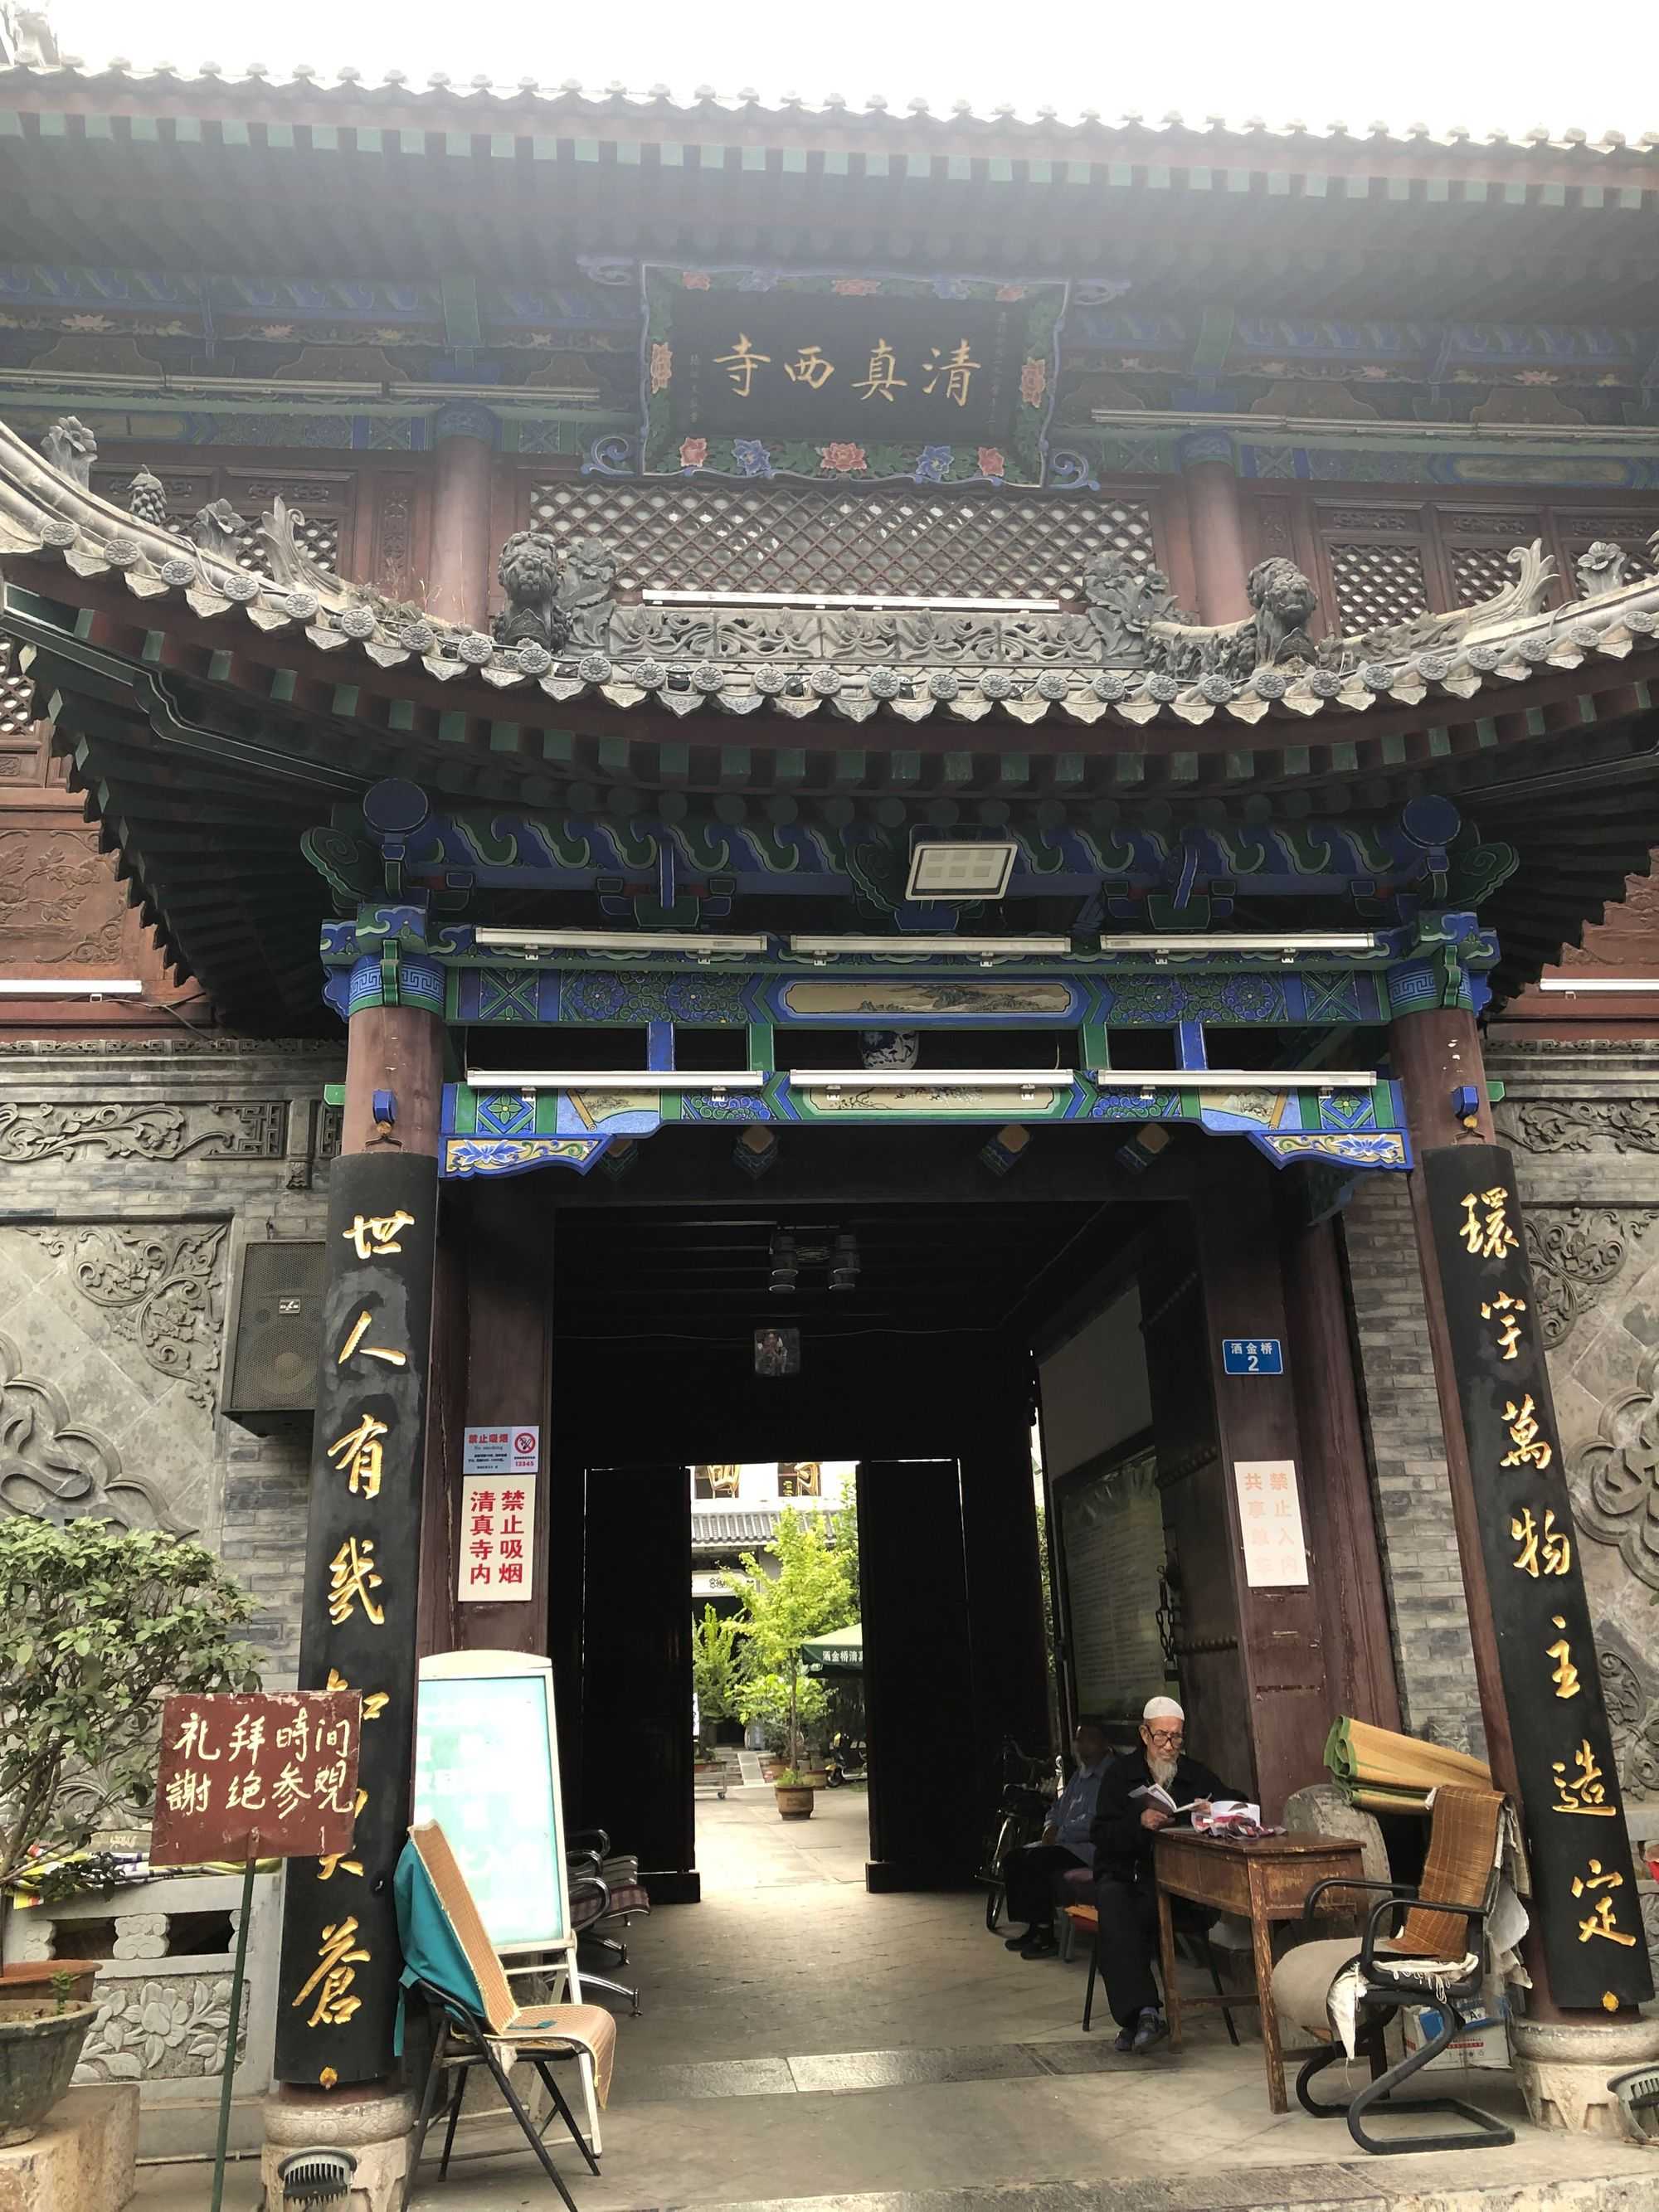 West Mosque (清真西寺) - A unique Mosque built with Chinese style architecture (Image by author)